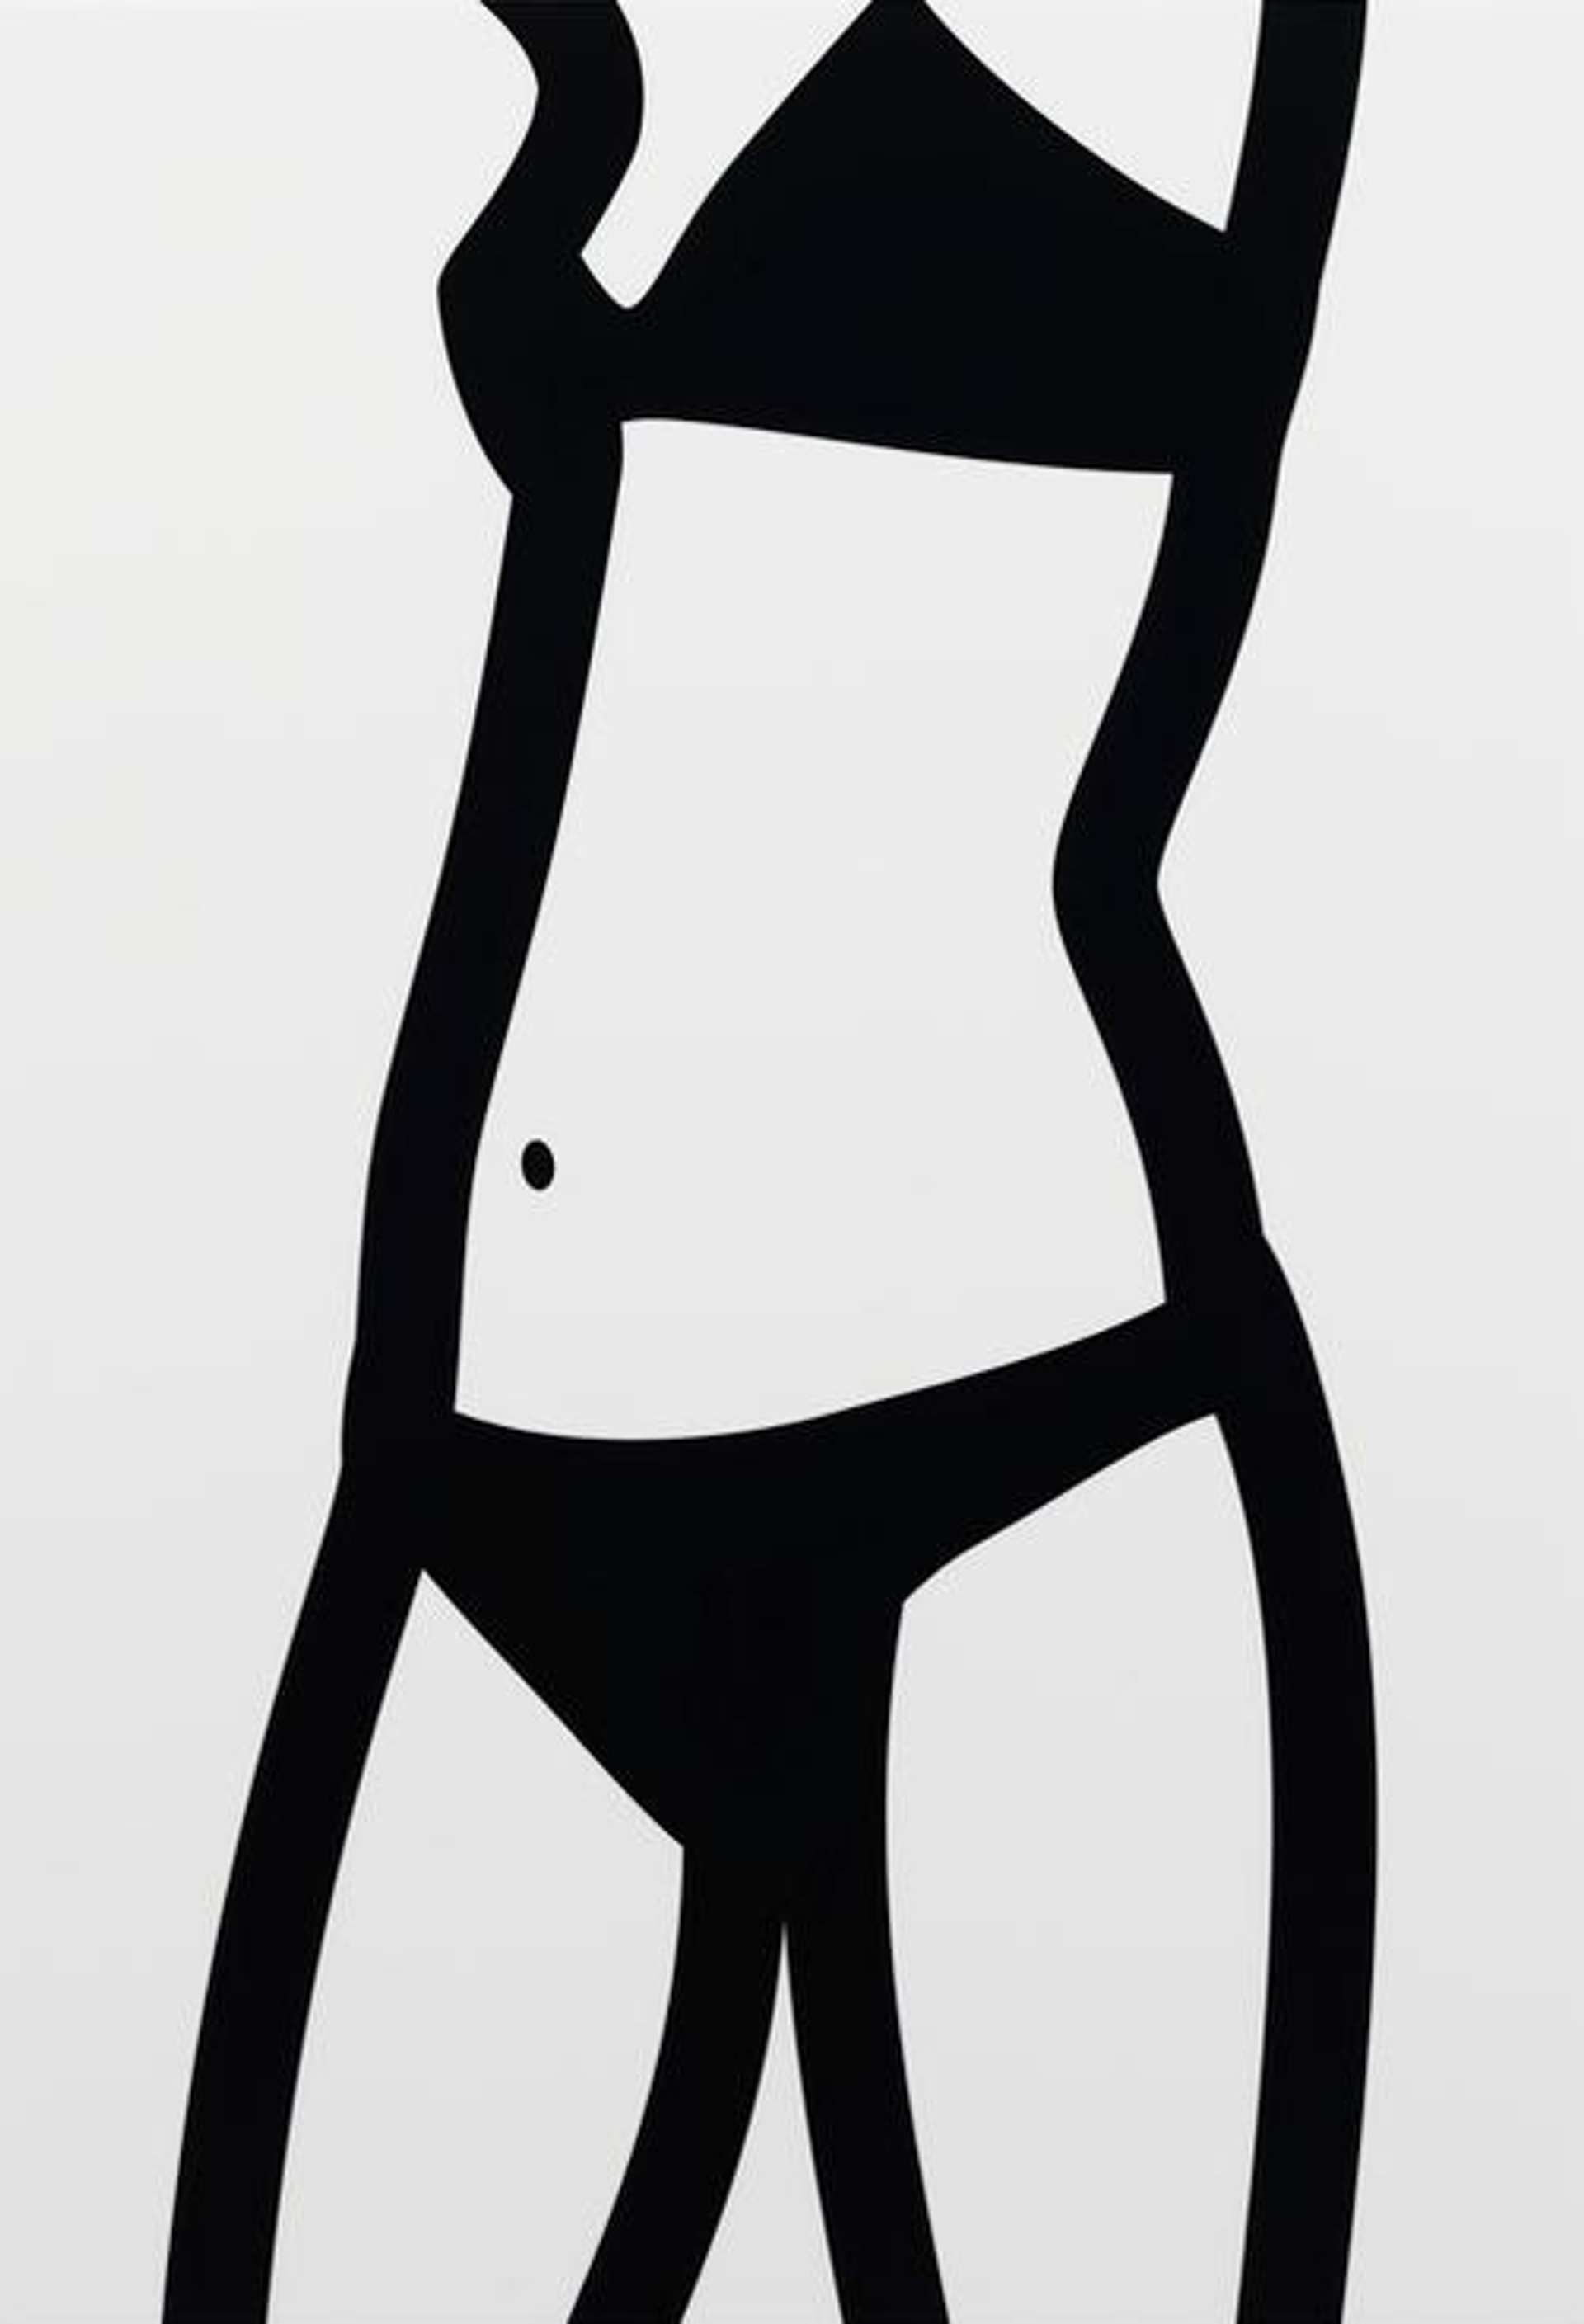 Julian Opie: Watching Suzanne (front) 3 - Signed Mixed Media